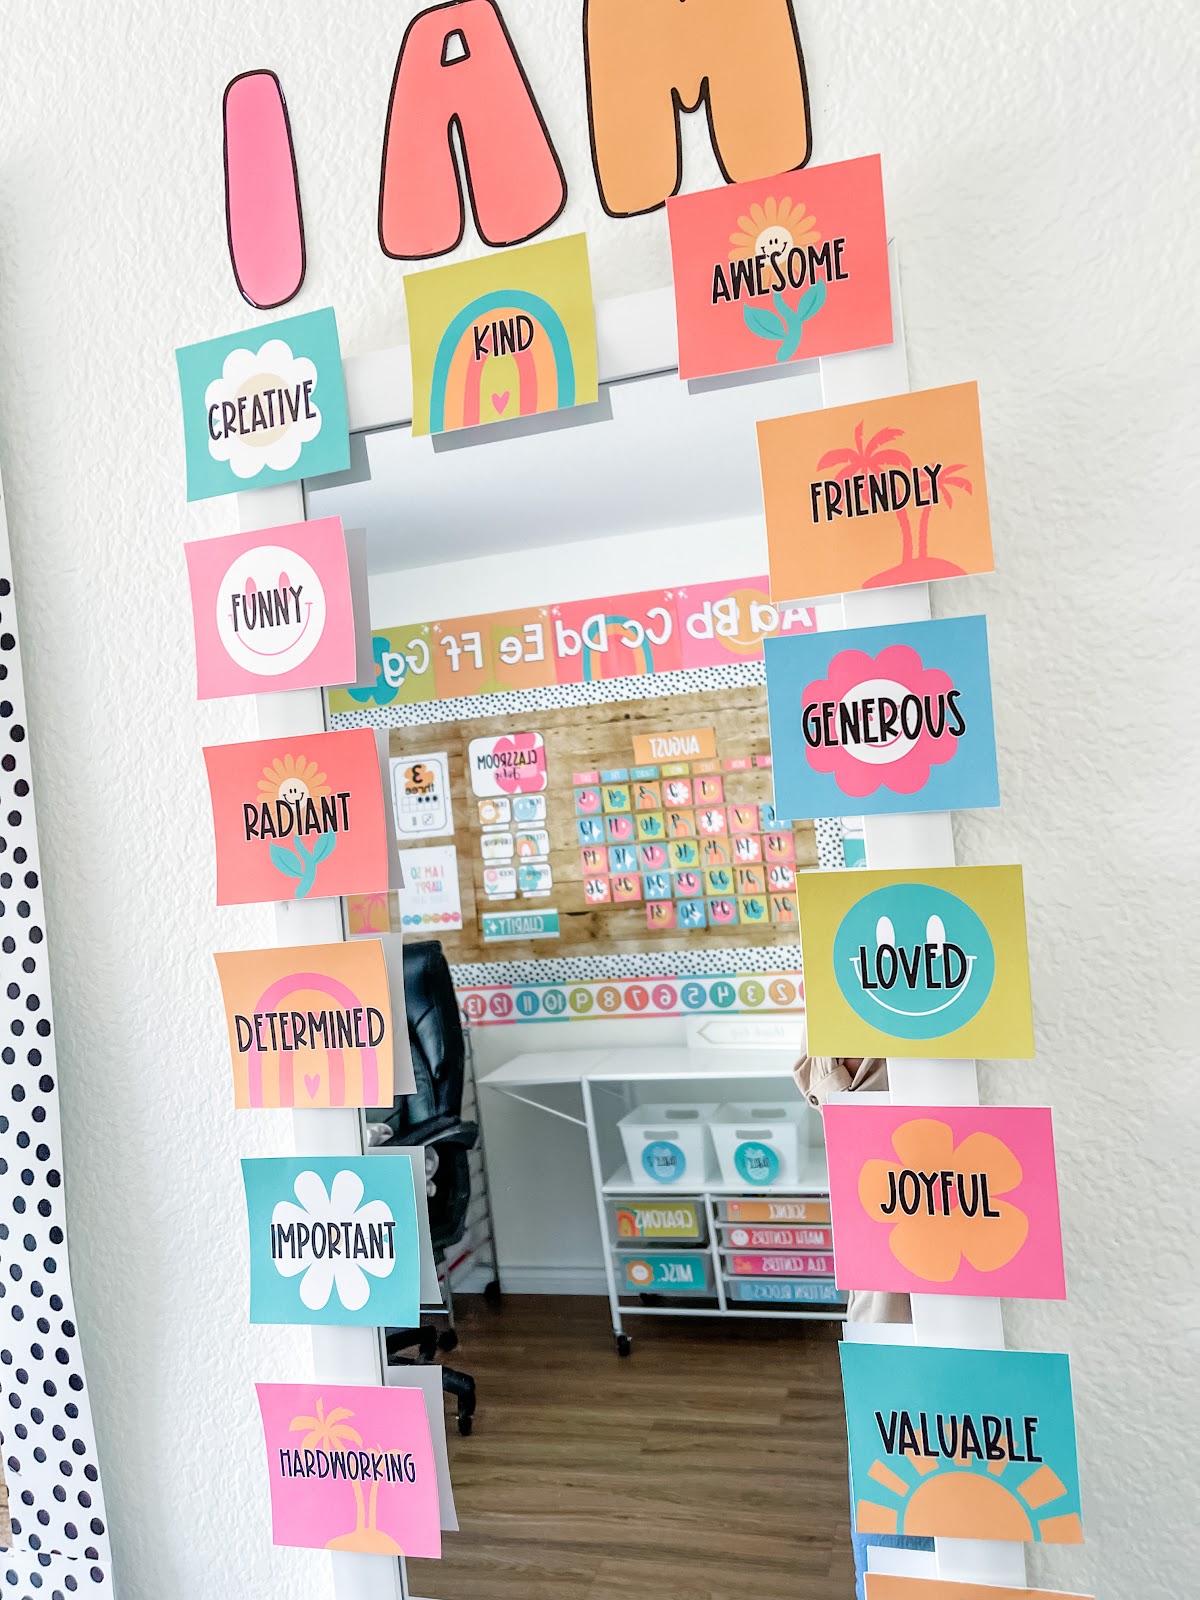 This image shows a mirror surrounded by bright-colored cards surrounding it. Above the mirror are the words "I am". There are words on each of the cards that are affirmations. These words are things like "Awesome", "Friendly", and "Determined". Each word card has an icon connected to the tropical theme.